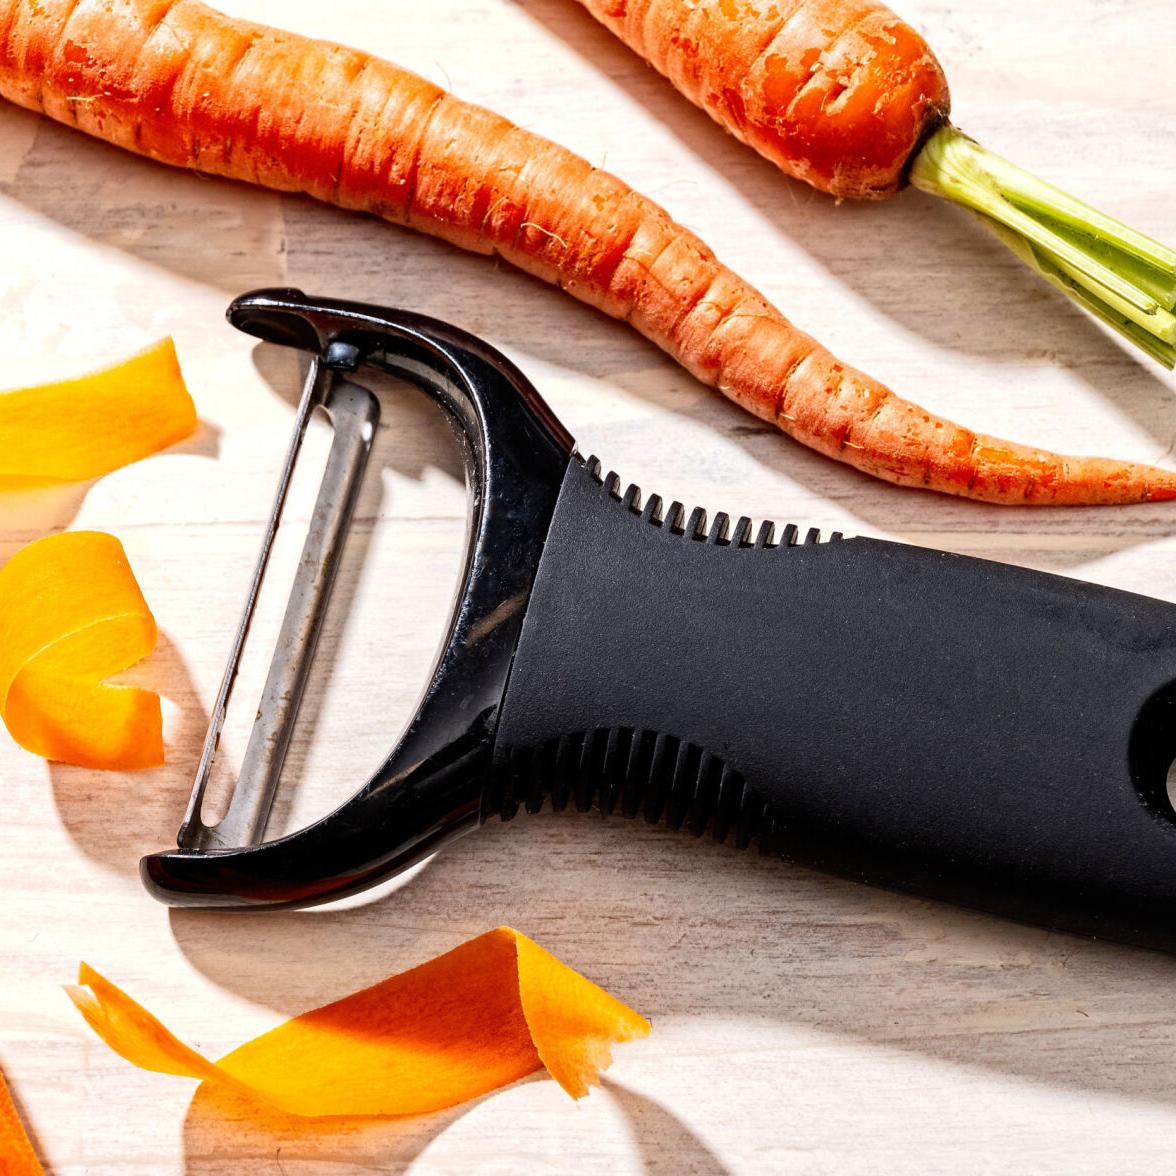 Bench Knife - The Clever Carrot